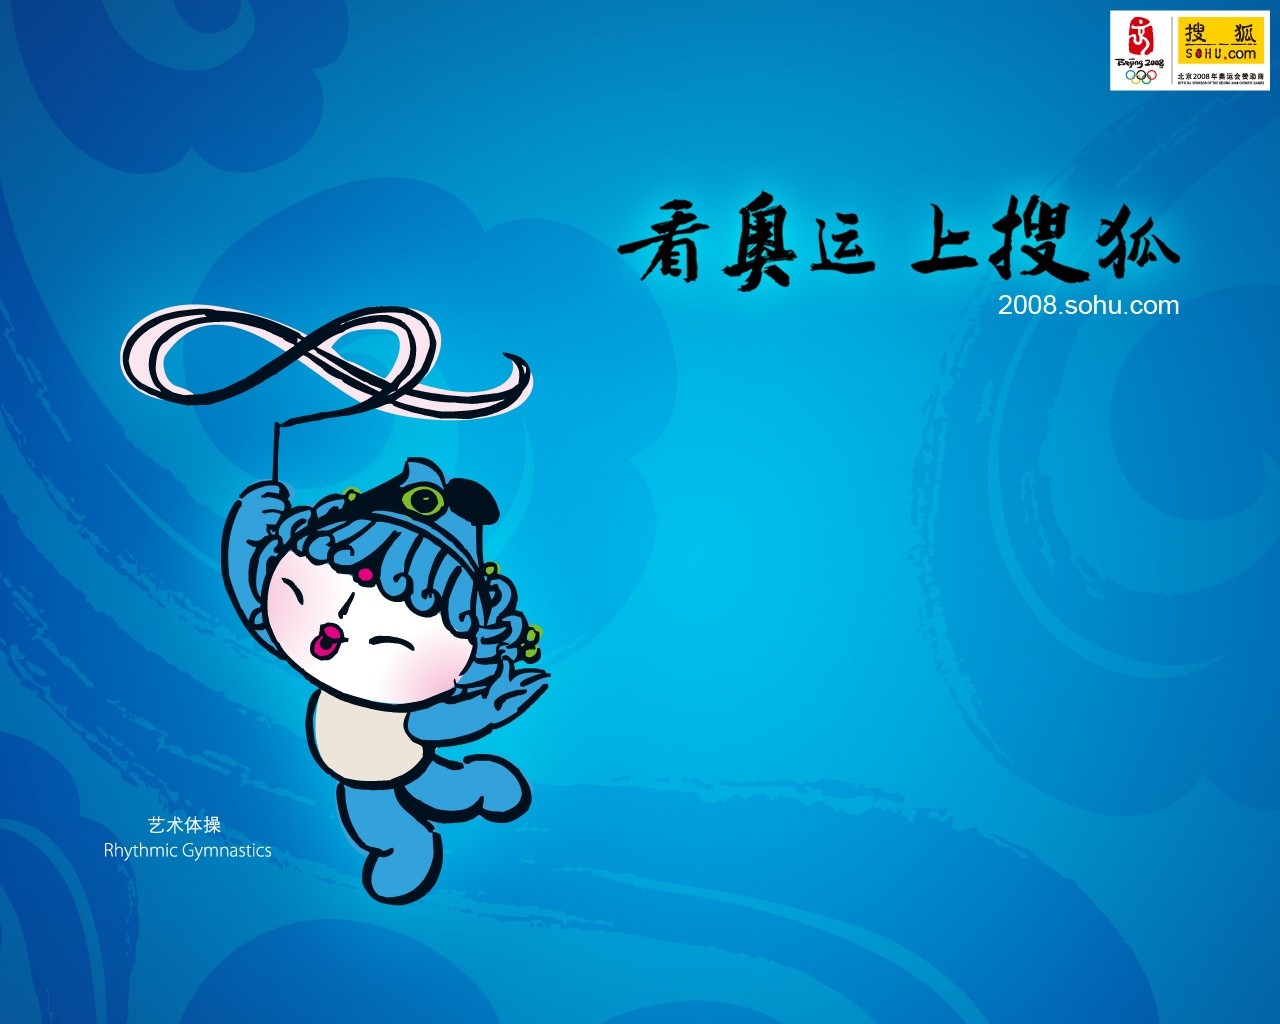 08 Olympic Games Fuwa Wallpapers #37 - 1280x1024